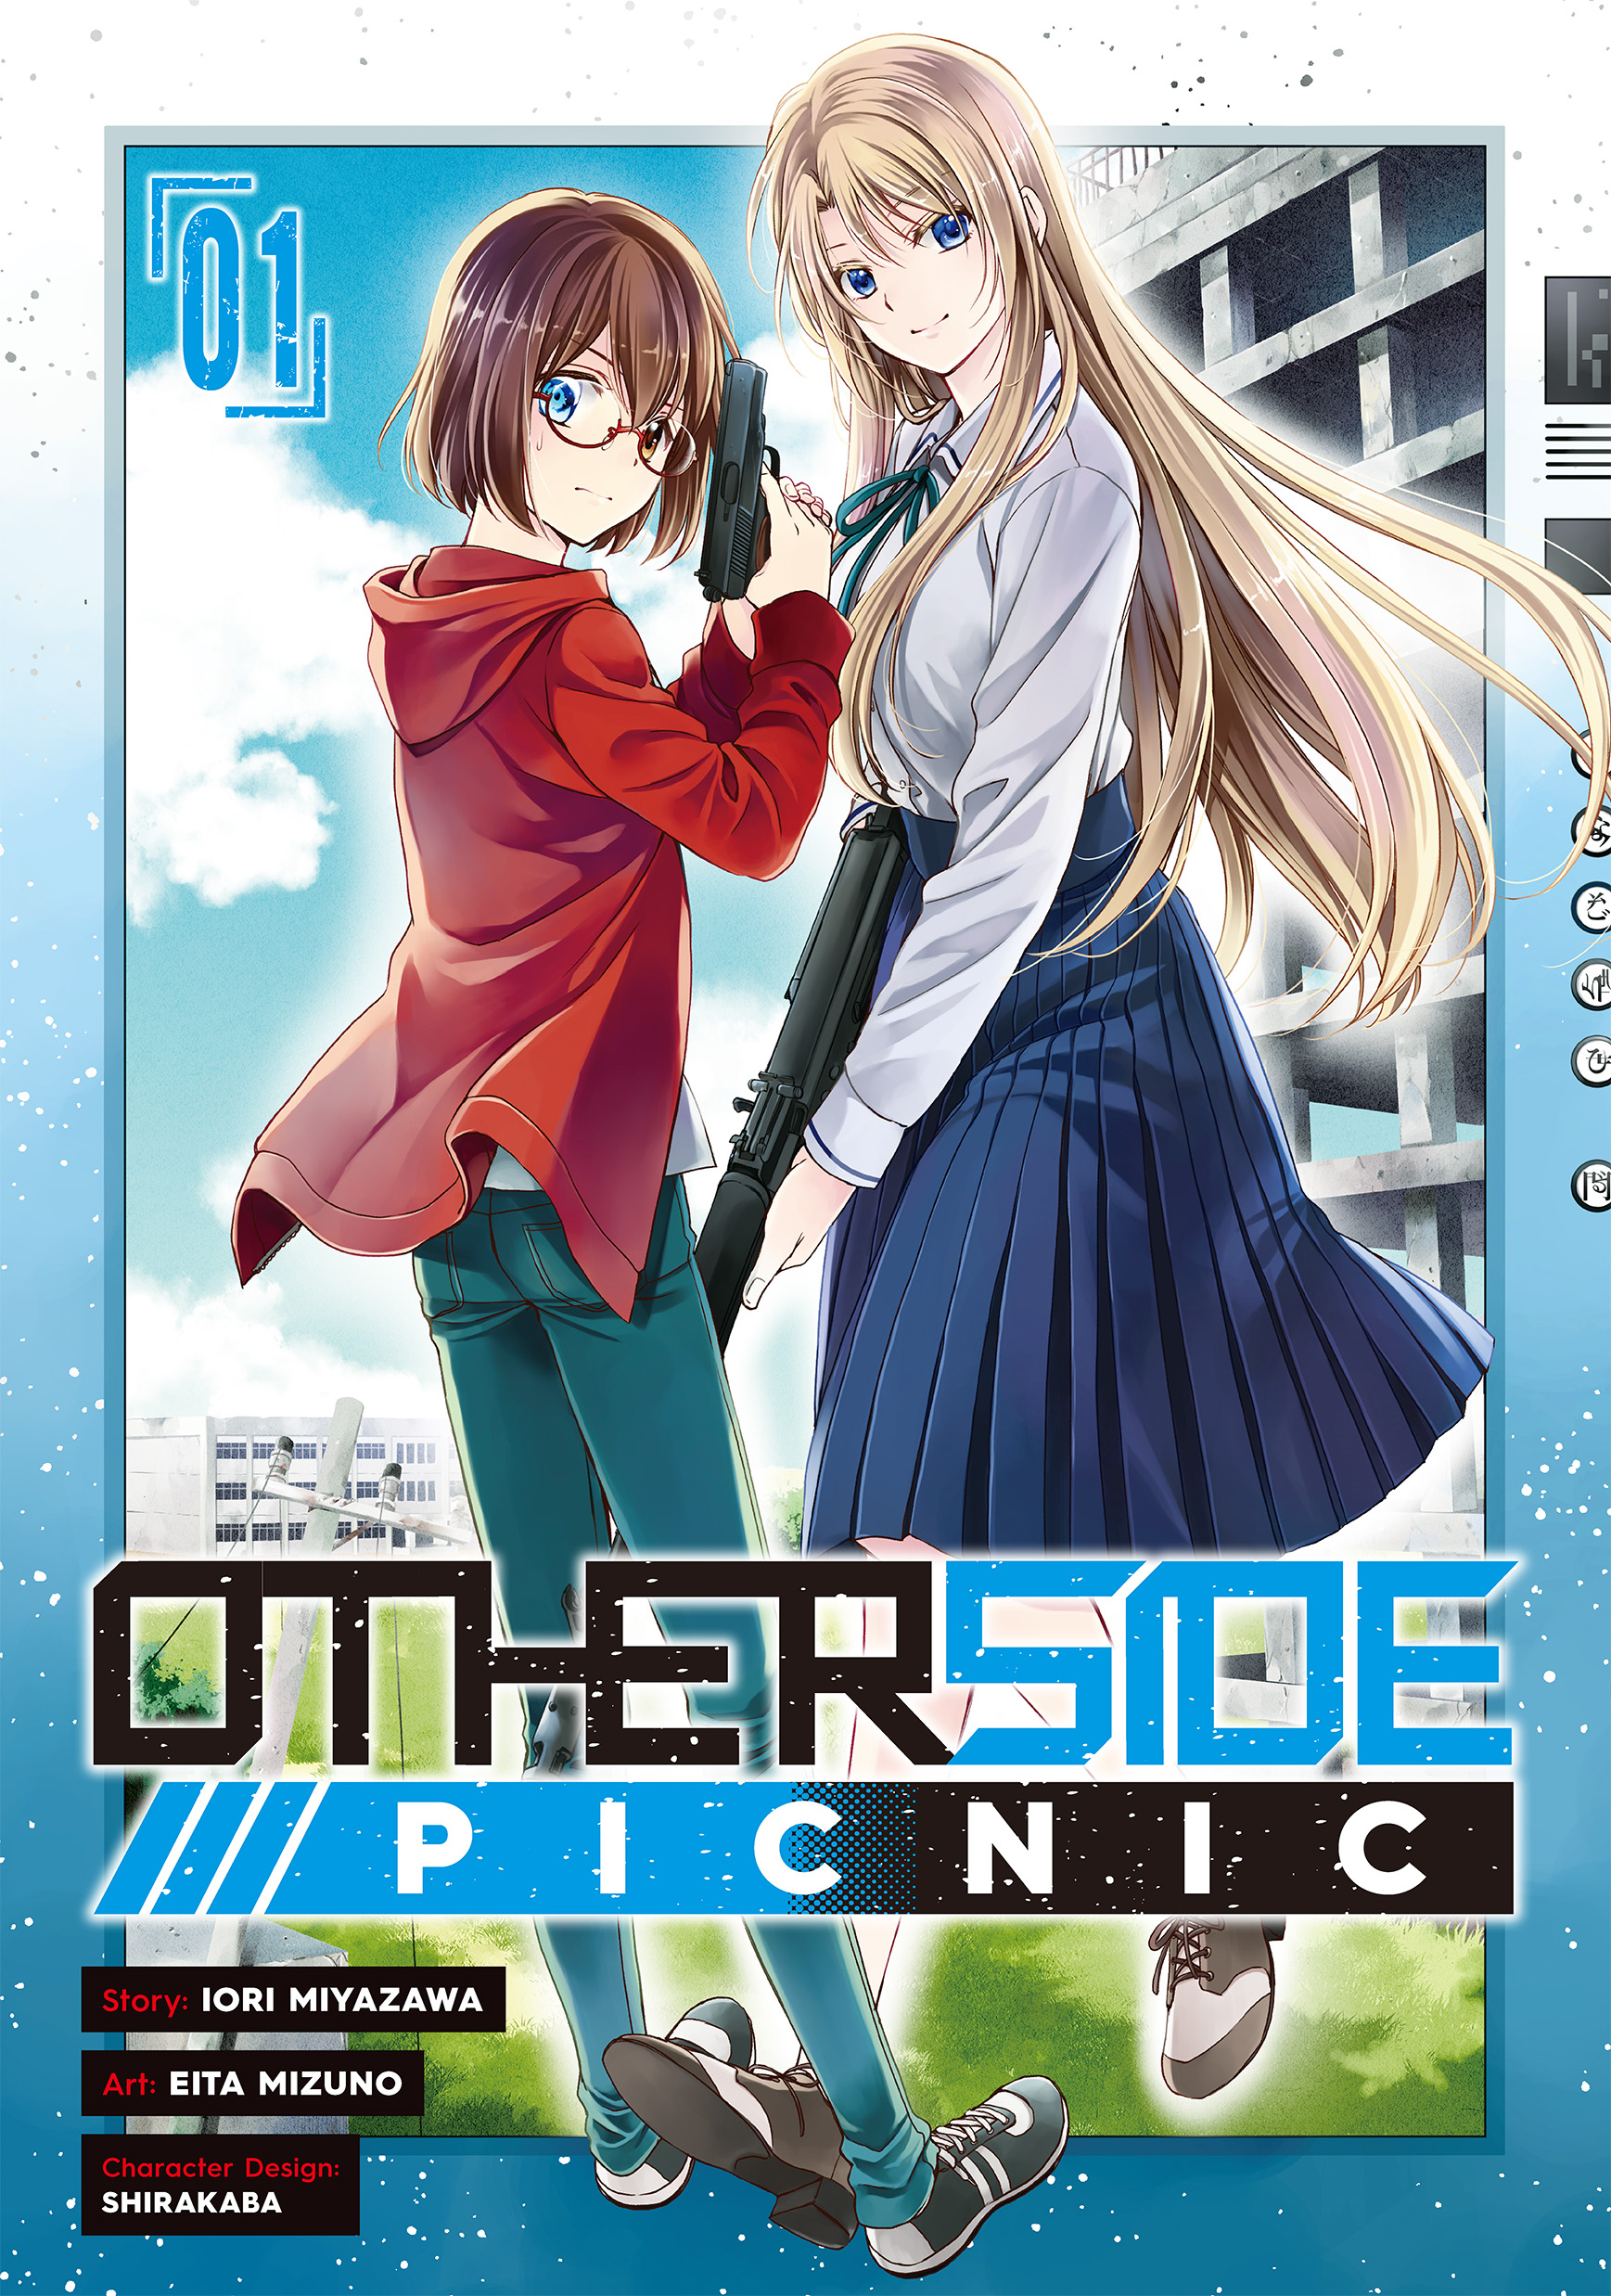 Chapter 25, Otherside Picnic Wiki